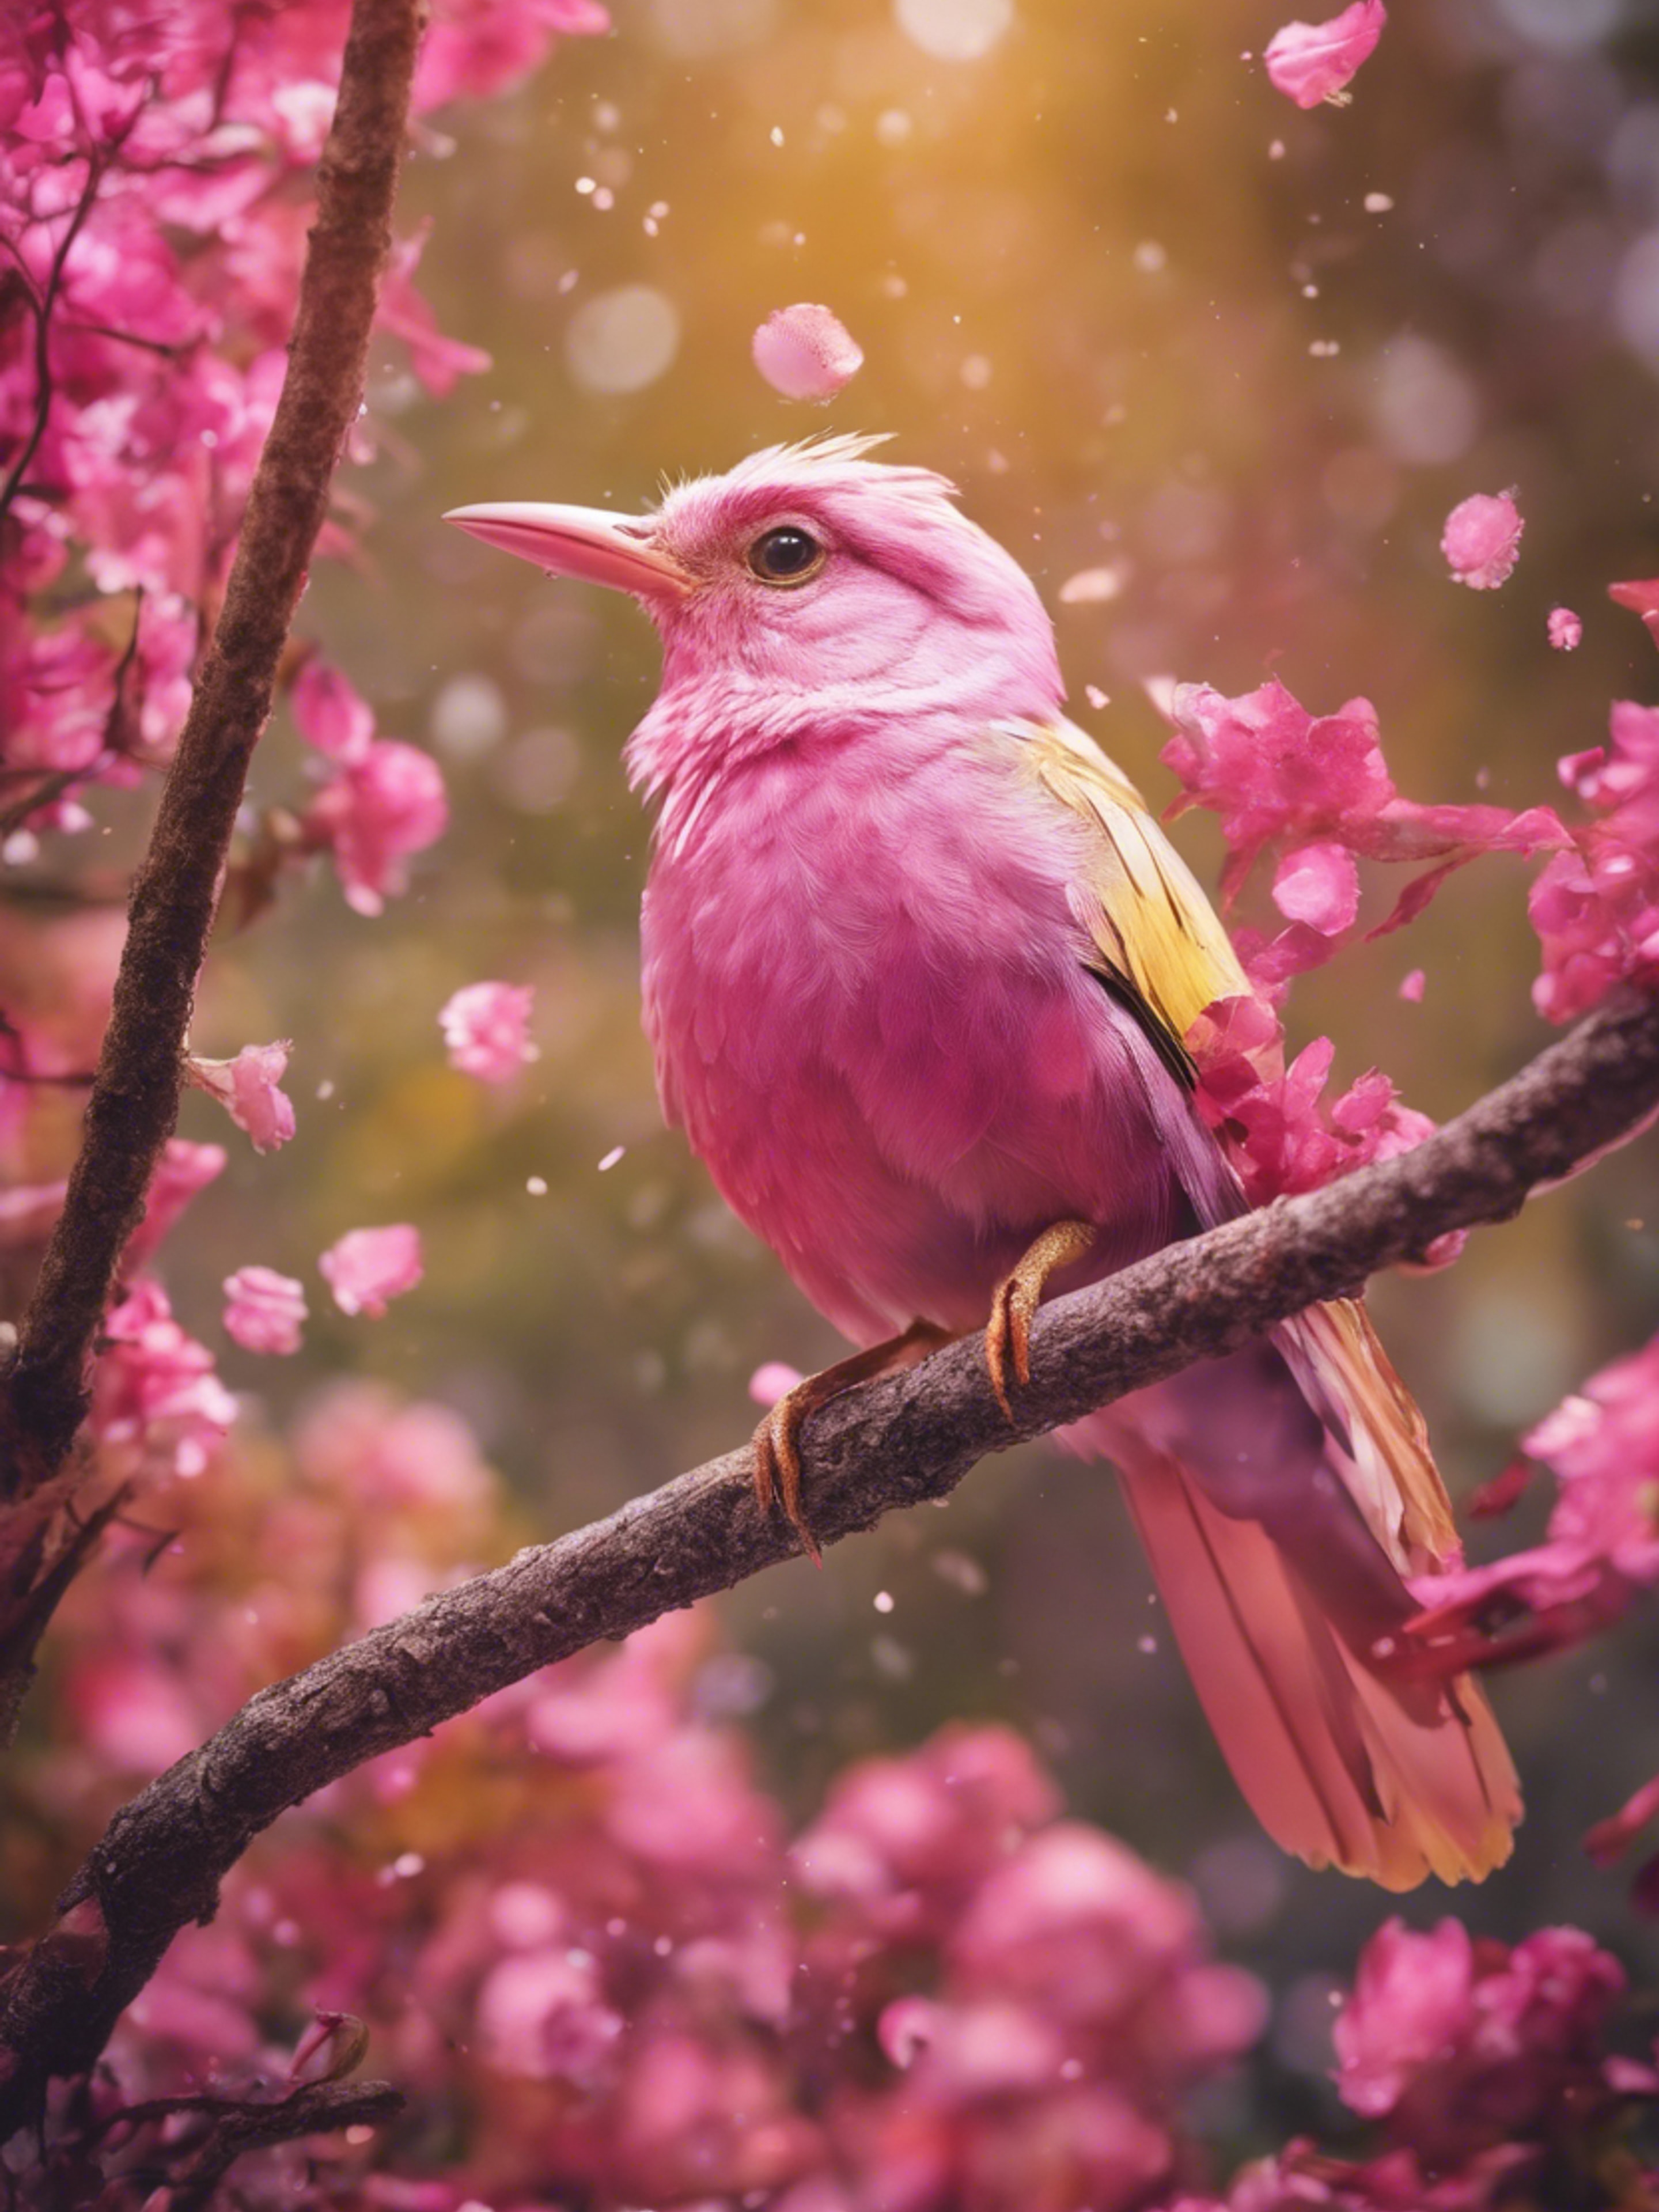 An enchanting pink and gold bird unknown of in biology books, fluttering in an explosion of color in the forest. Wallpaper[4daf5f1d2e46407b9d3d]